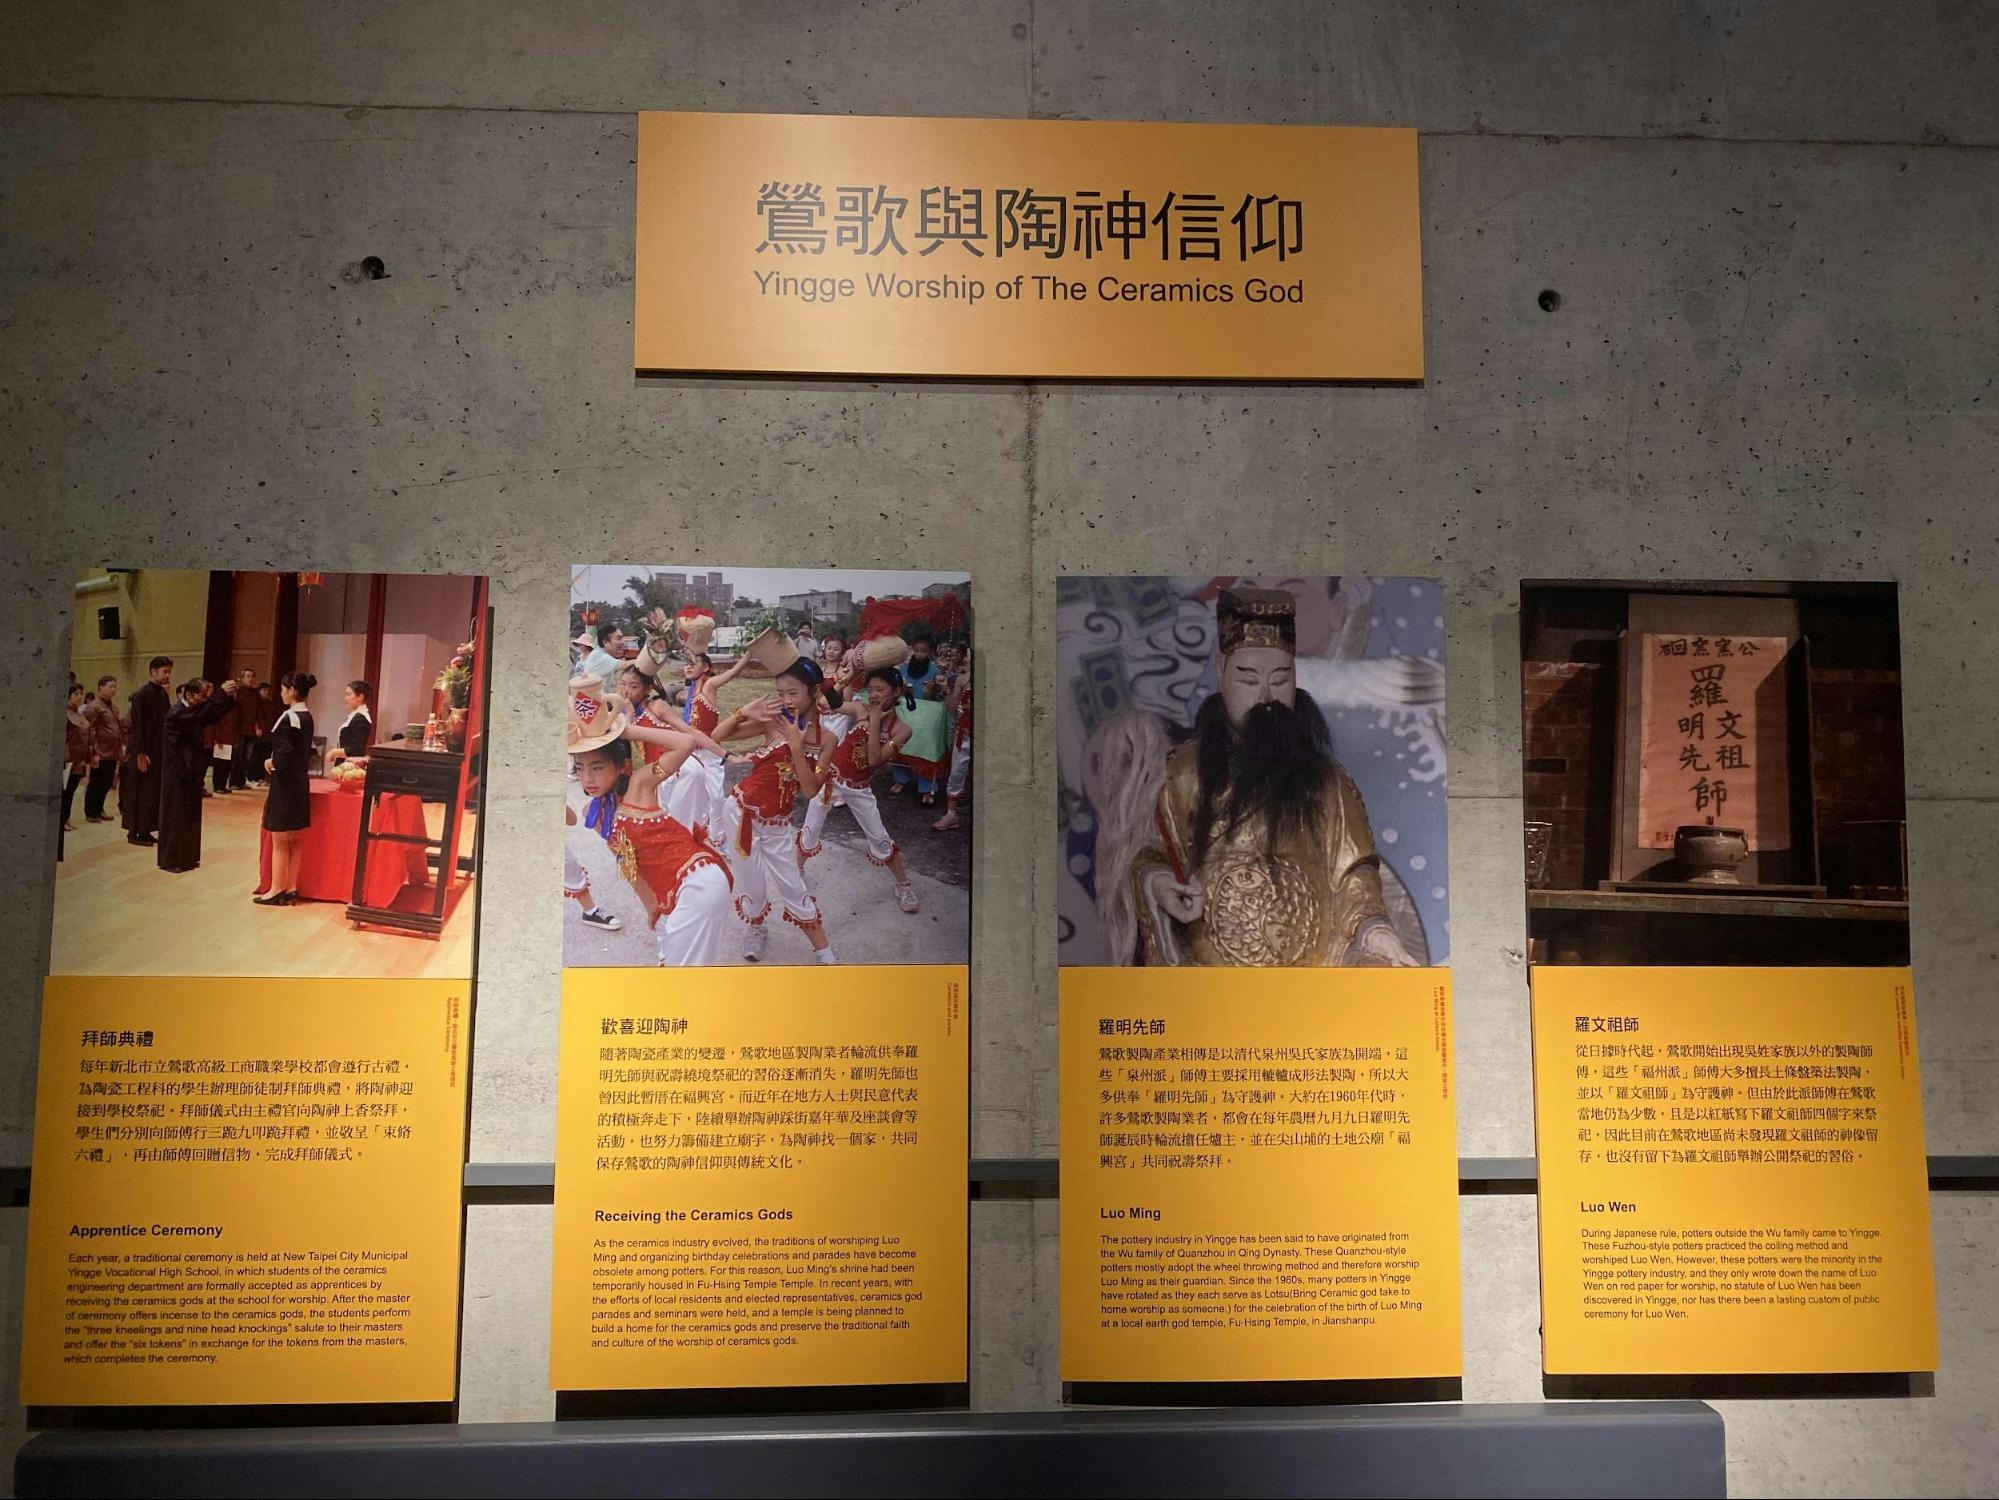 Yingge Museum displays on the cultural practice of worshipping the Ceramics God/Kiln God